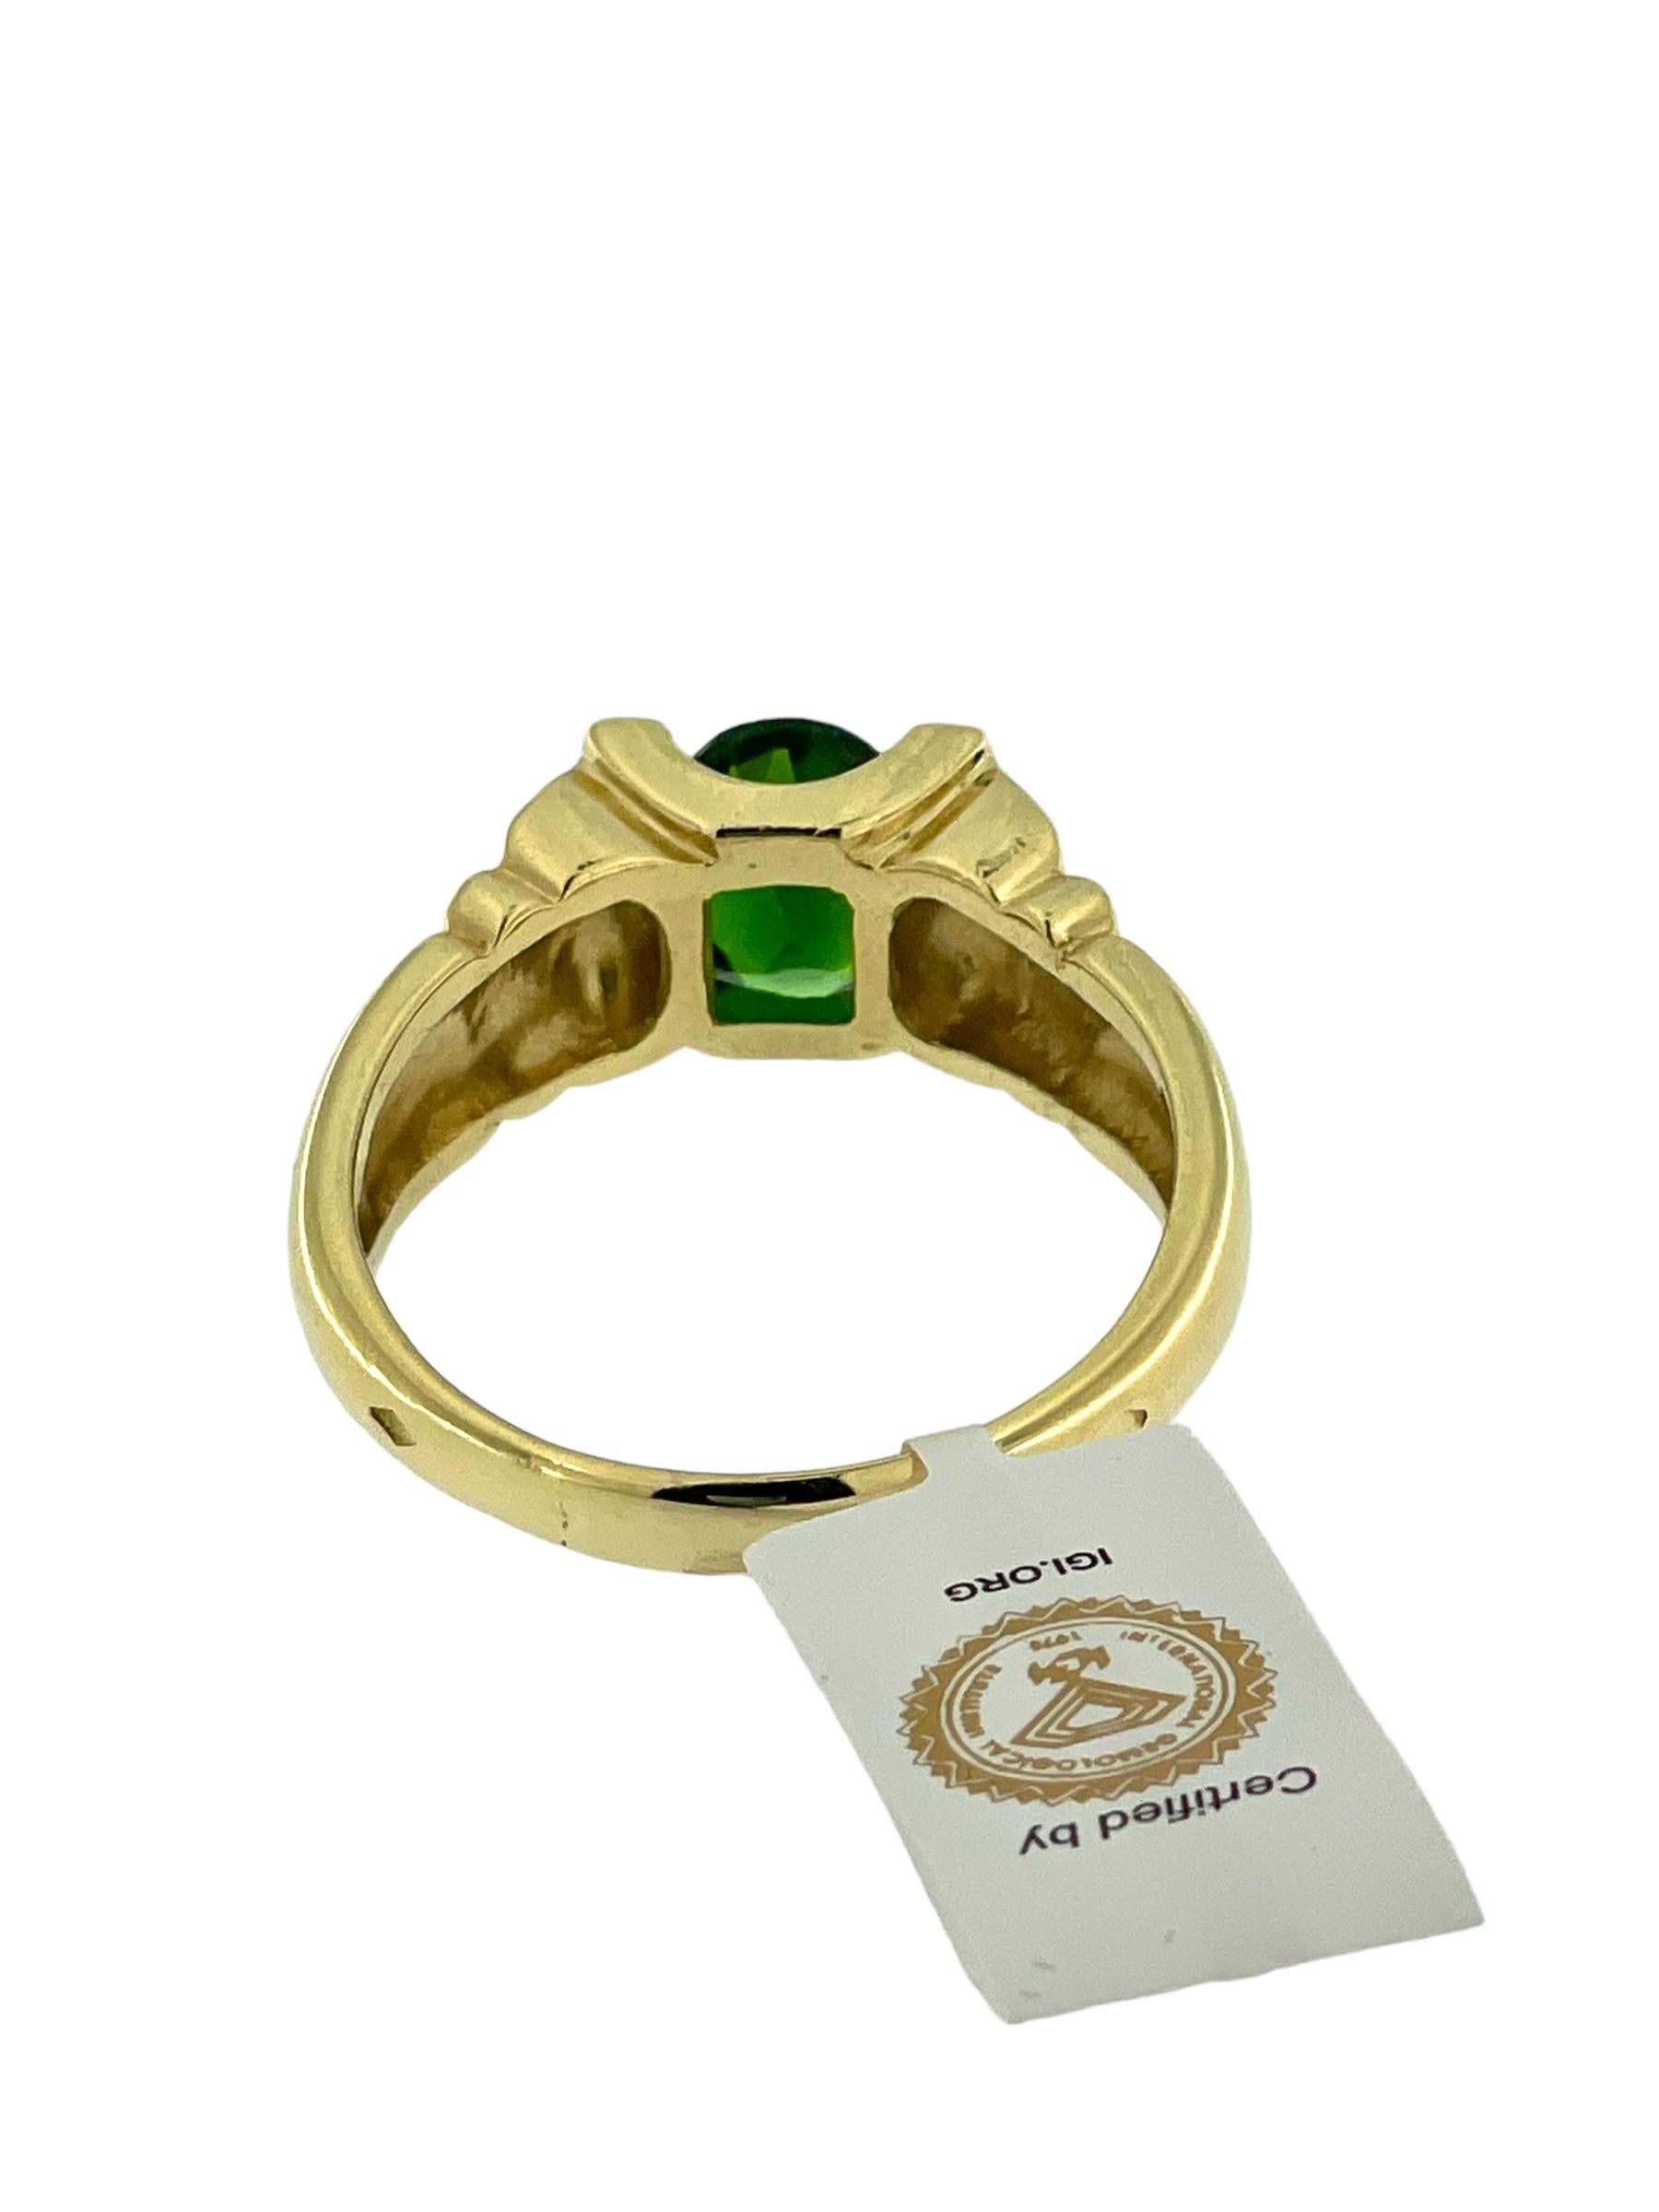 Retro Vintage Yellow Gold Signet Ring with Diamonds and Green Diopside IGI Certified  For Sale